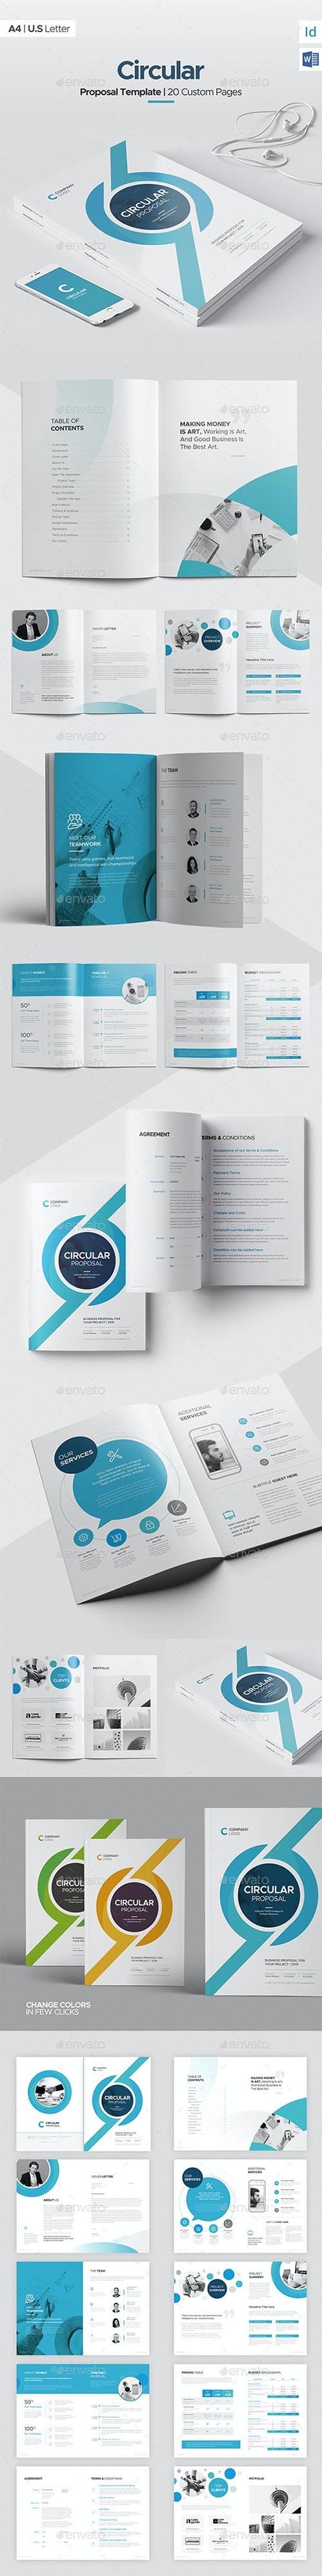 Corporate Brand Guidelines - Brand Manuals